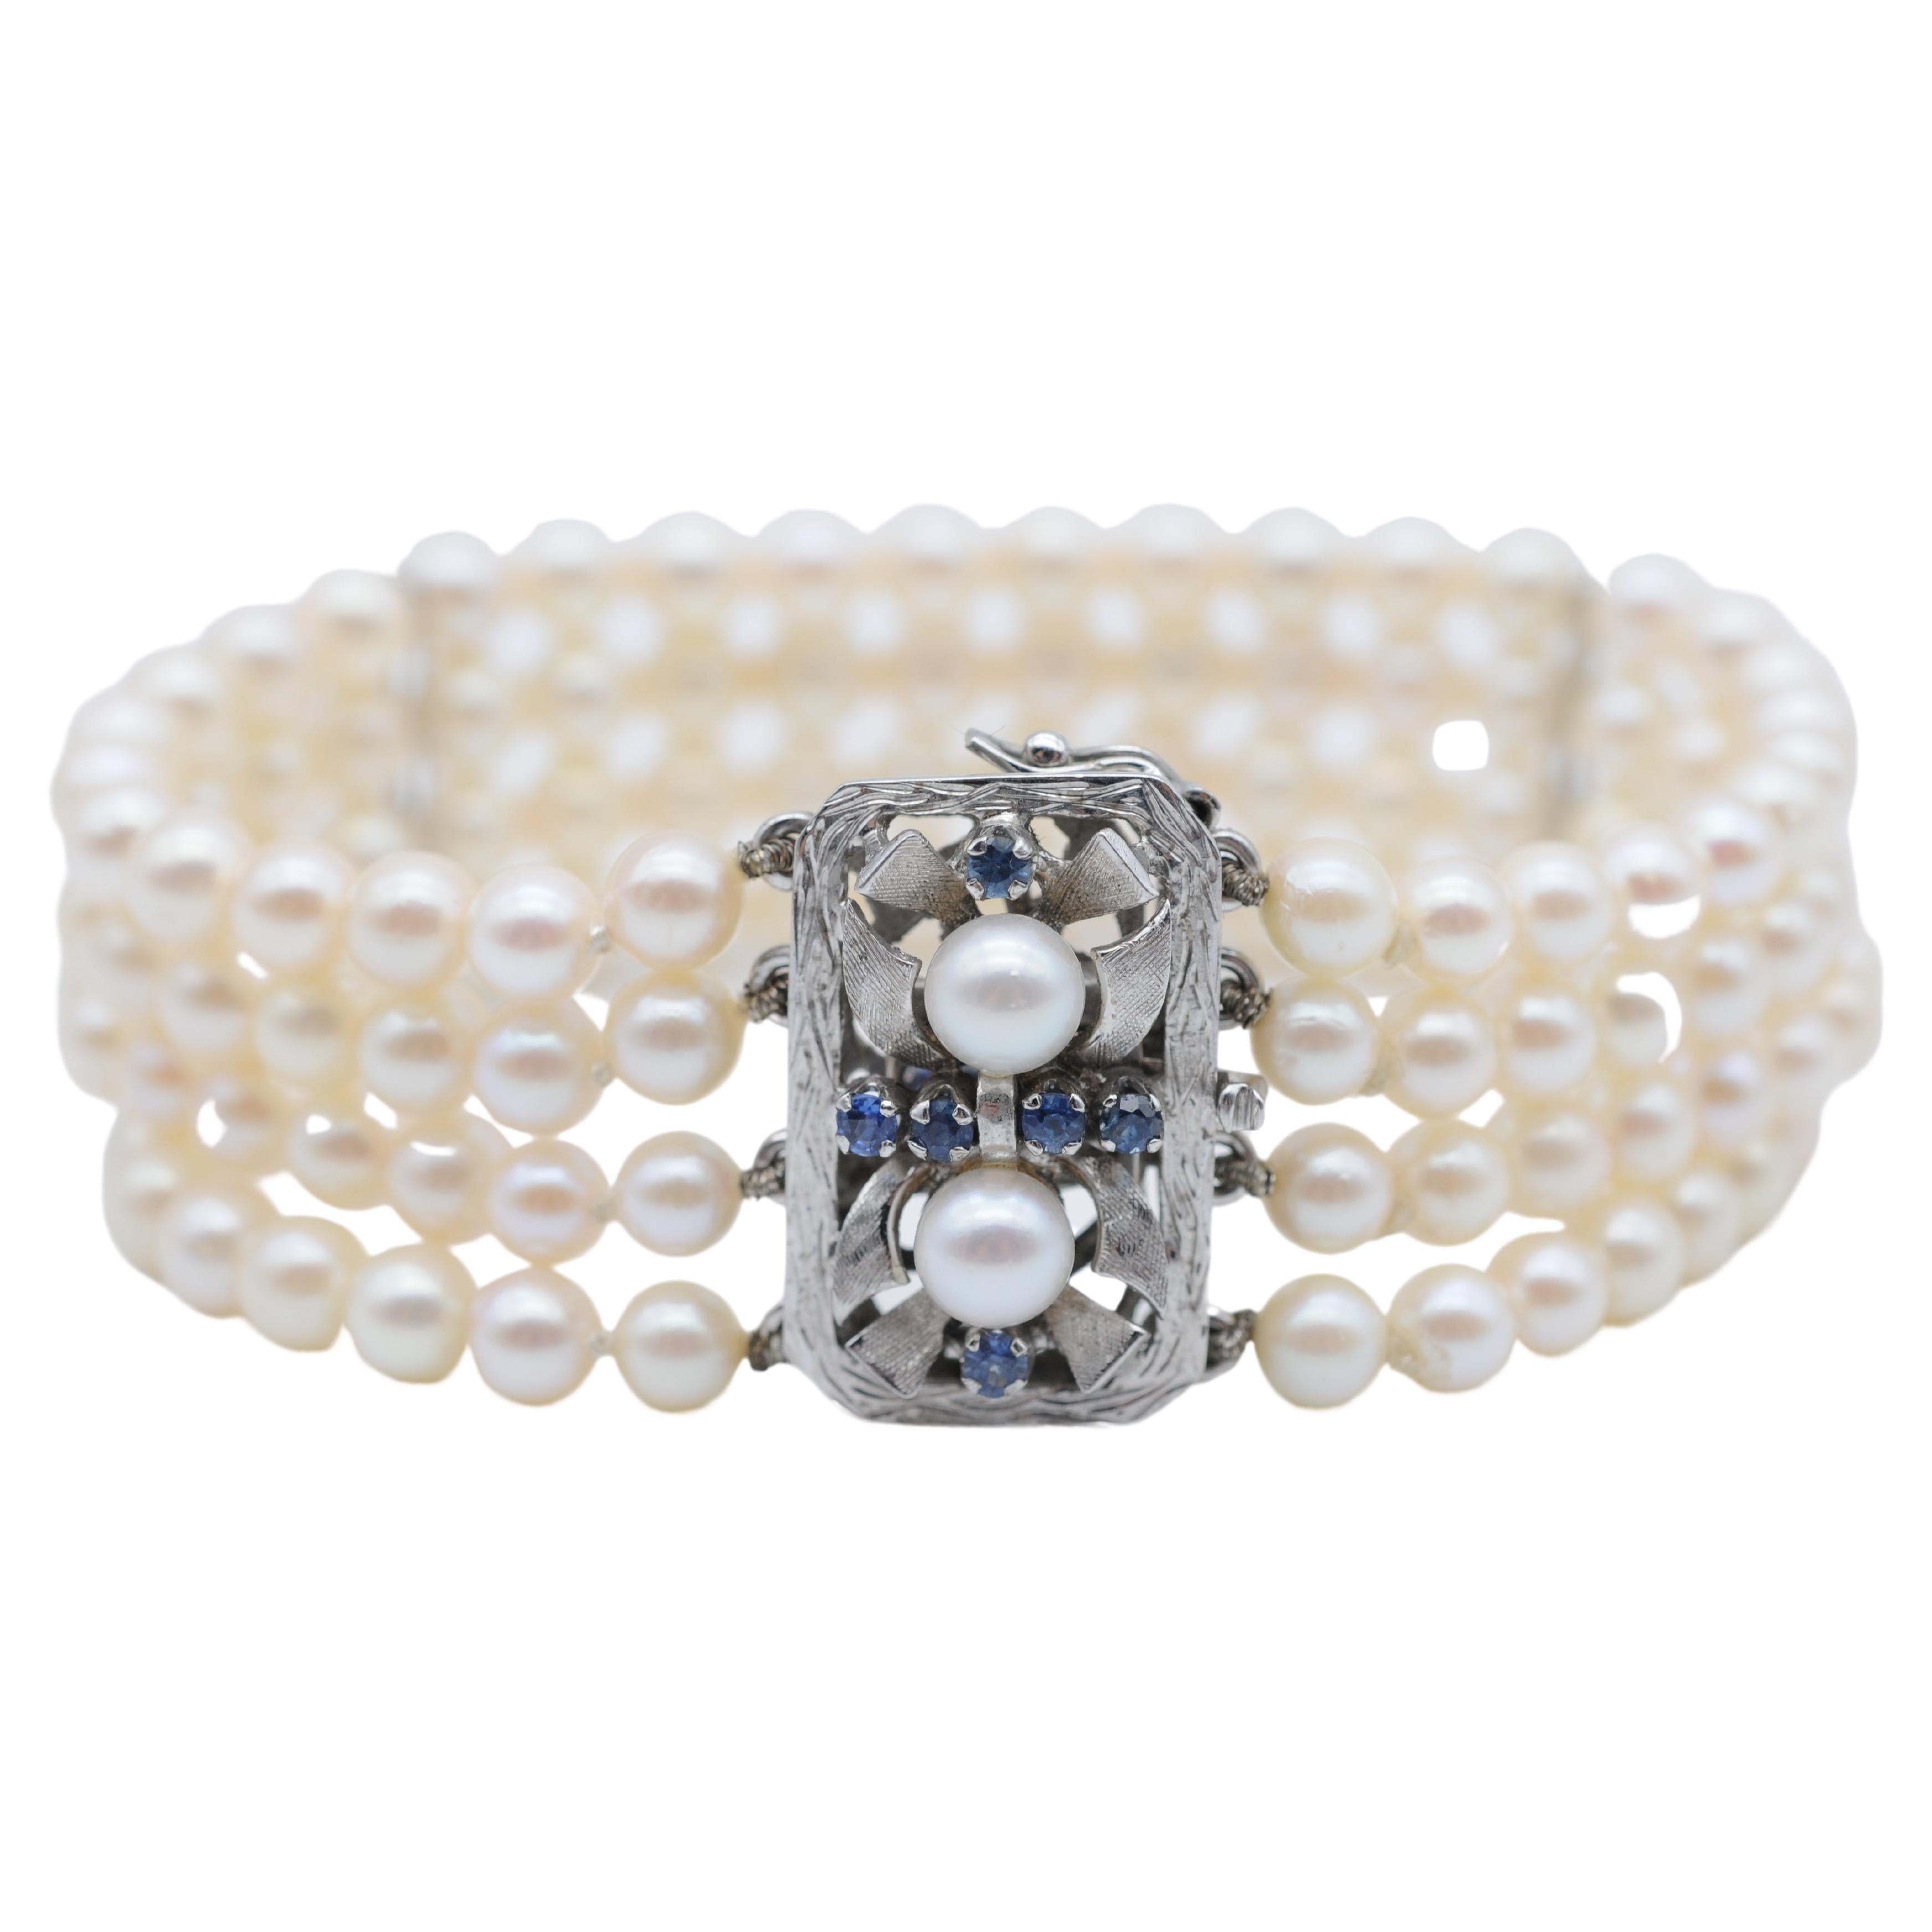 Noble Pearl Bracelet, 14k White Gold and Sapphires